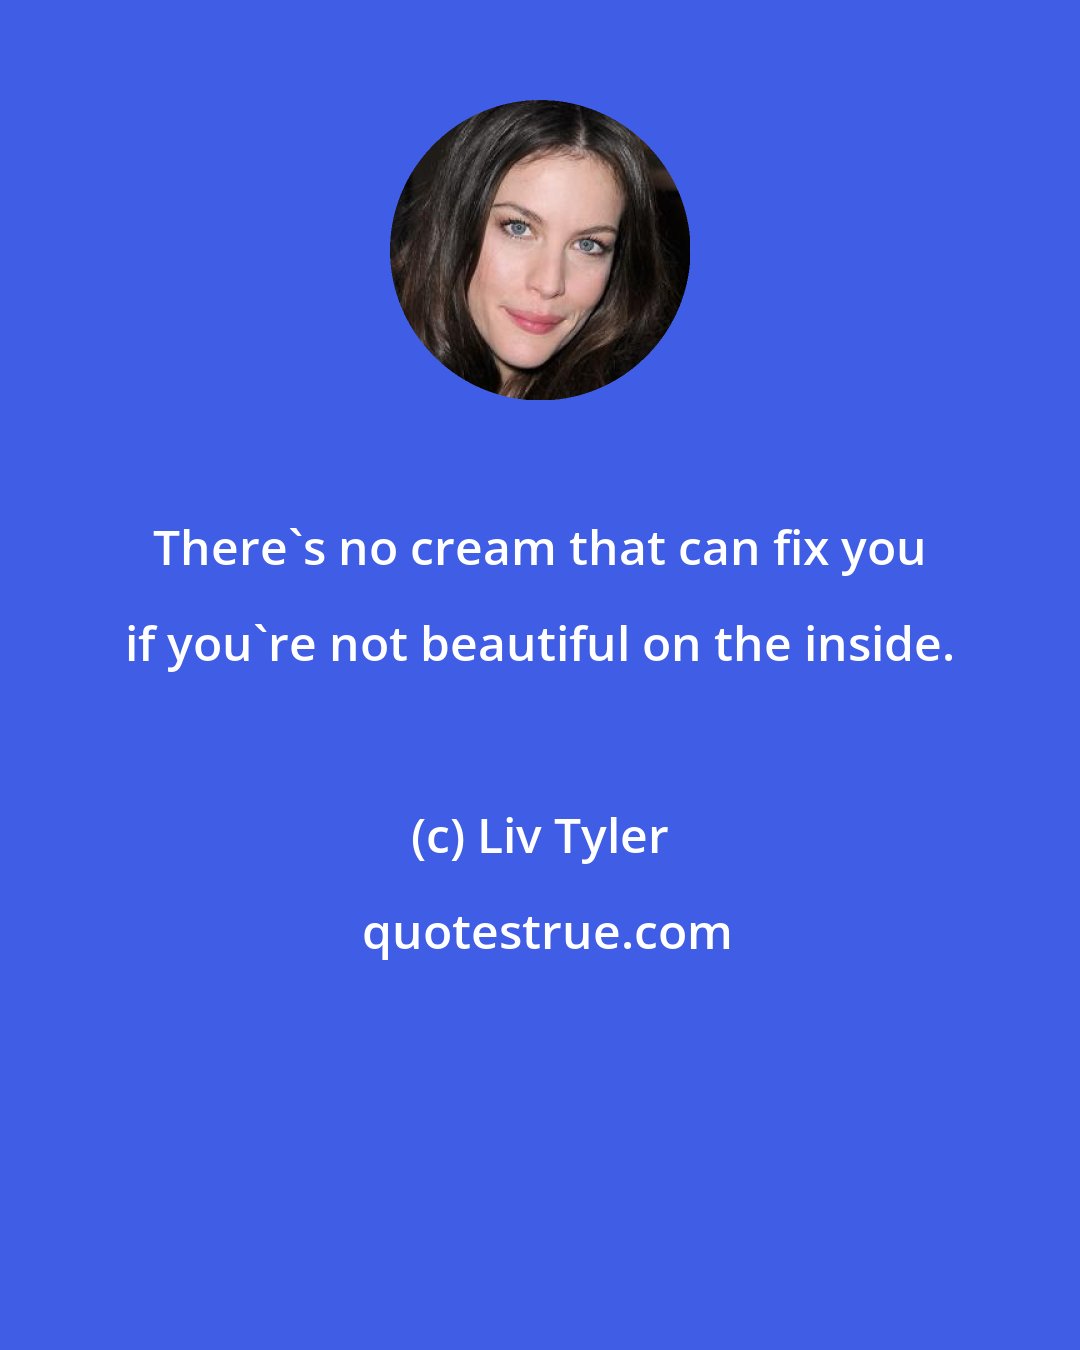 Liv Tyler: There's no cream that can fix you if you're not beautiful on the inside.